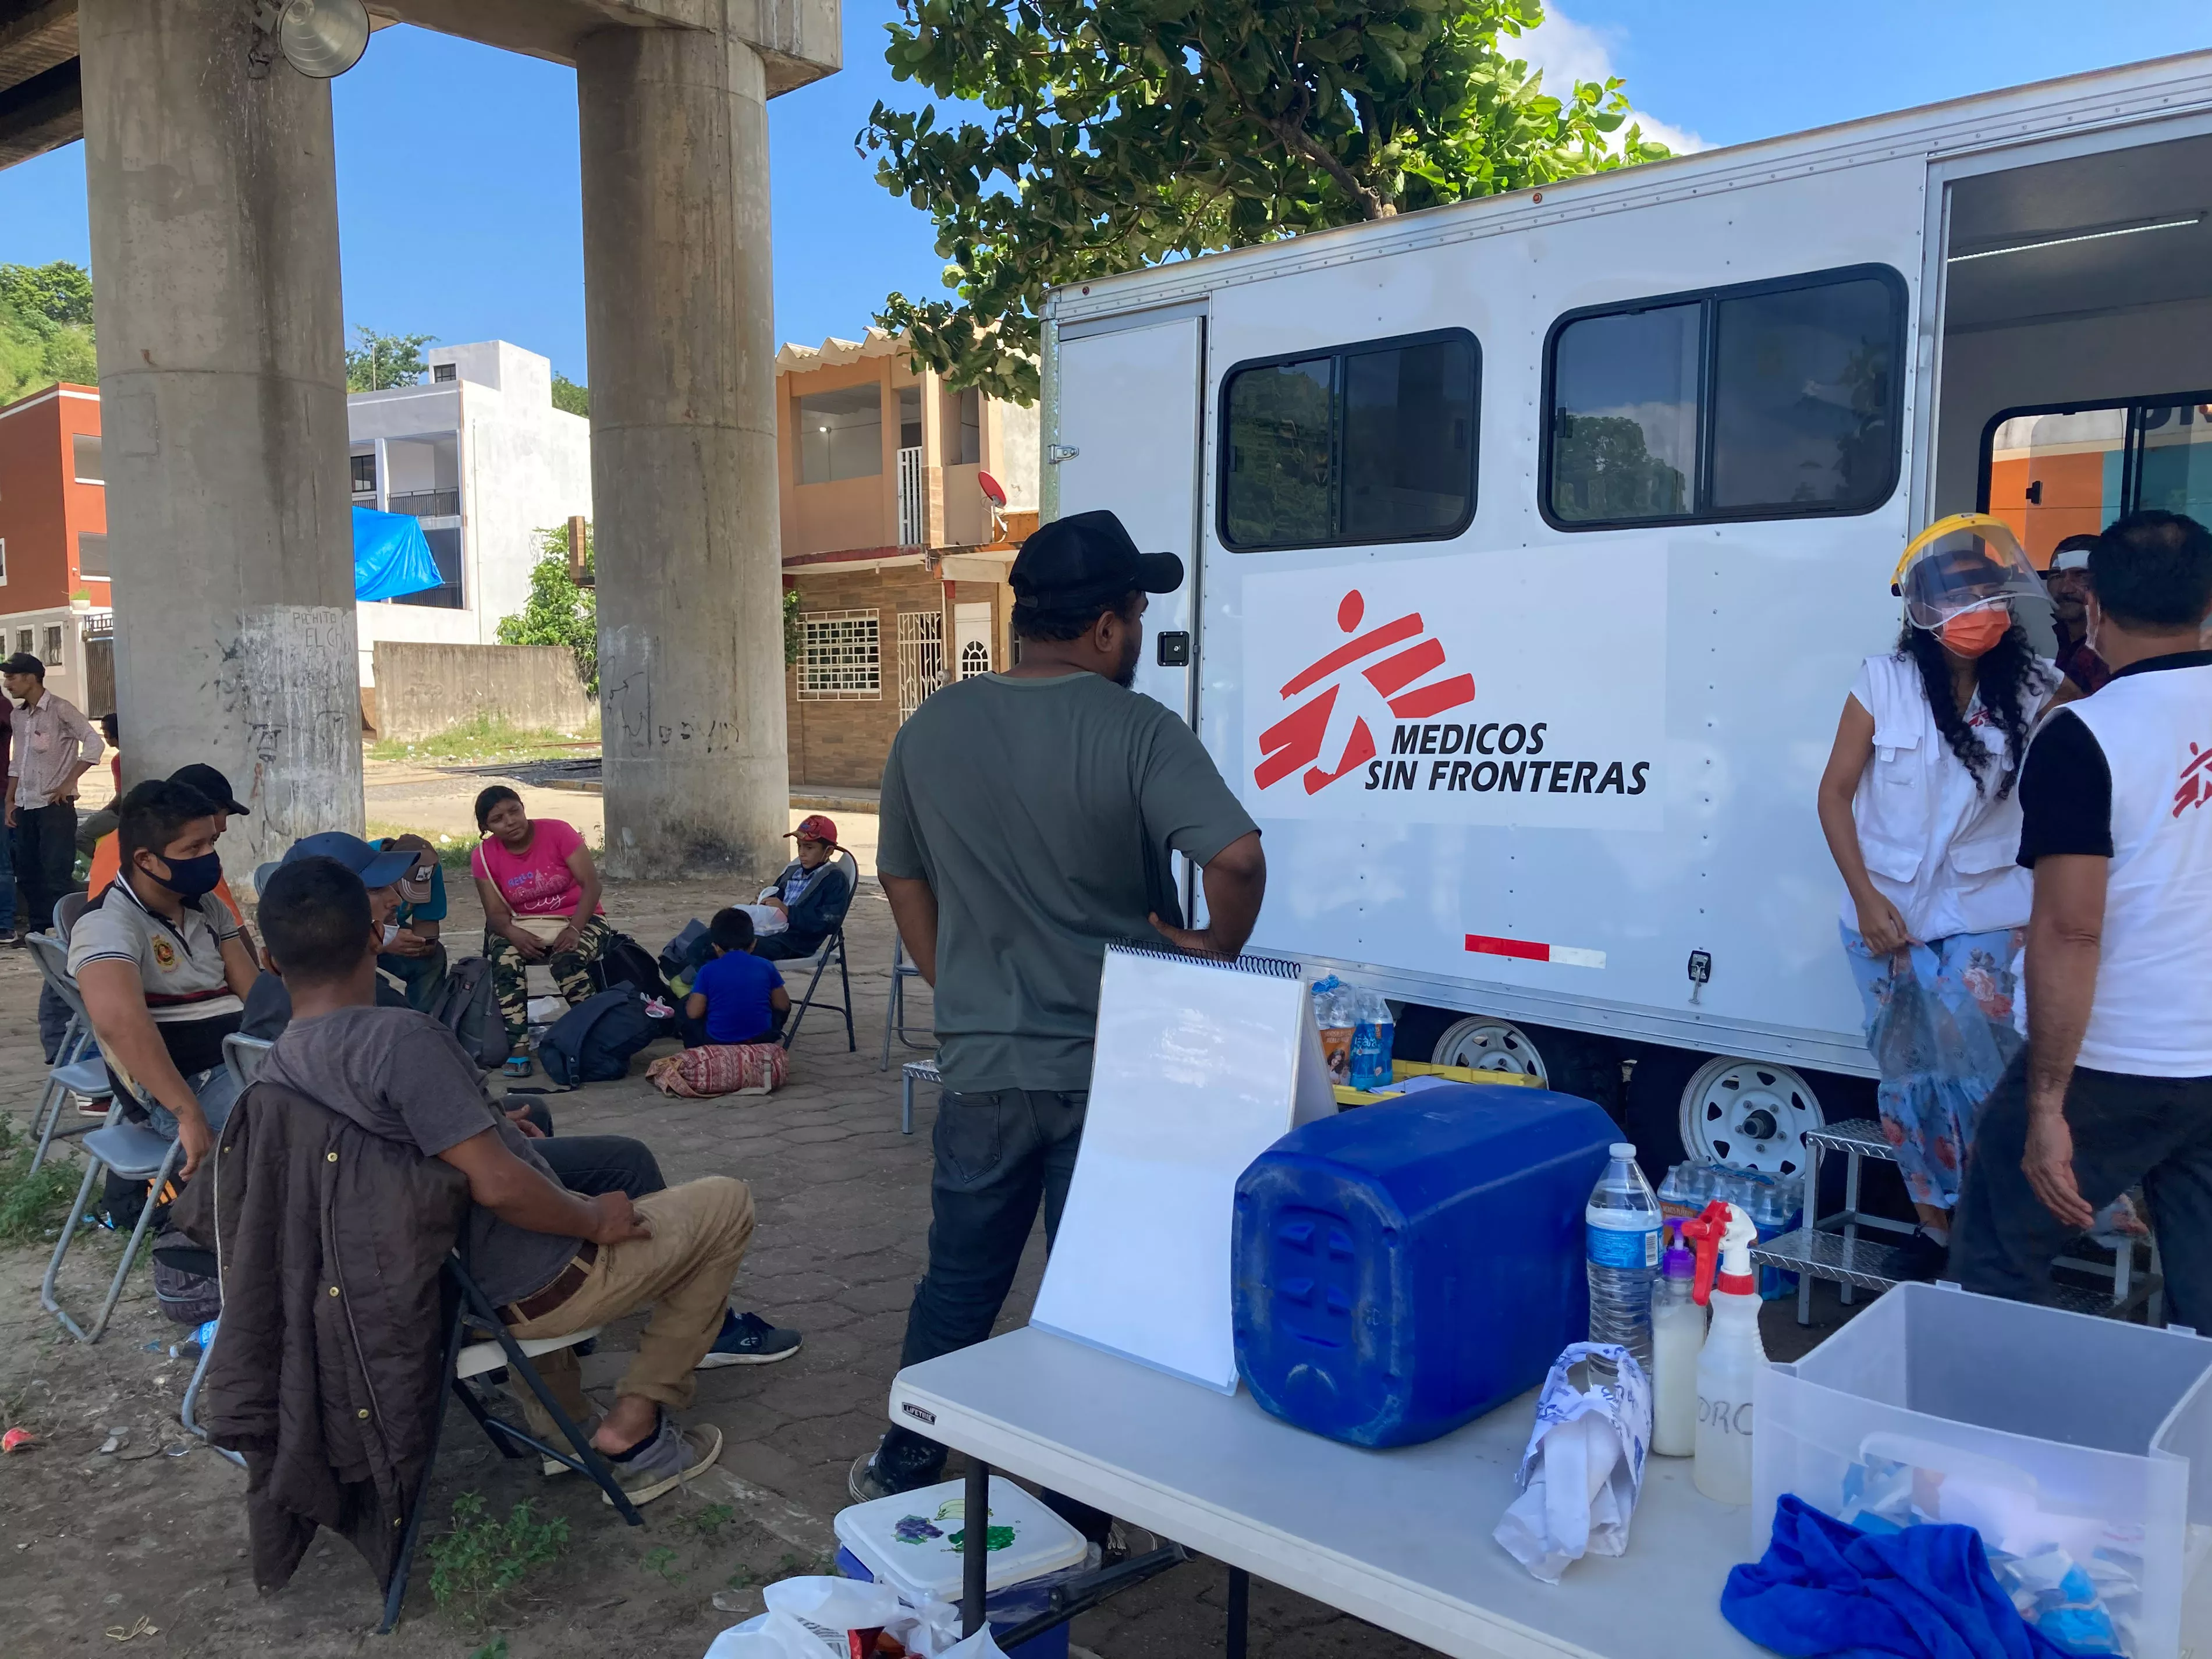 An MSF mobile team travels through southeastern Mexico to provide humanitarian medical assistance to hundreds of people entering the country, including preventive measures against COVID-19.